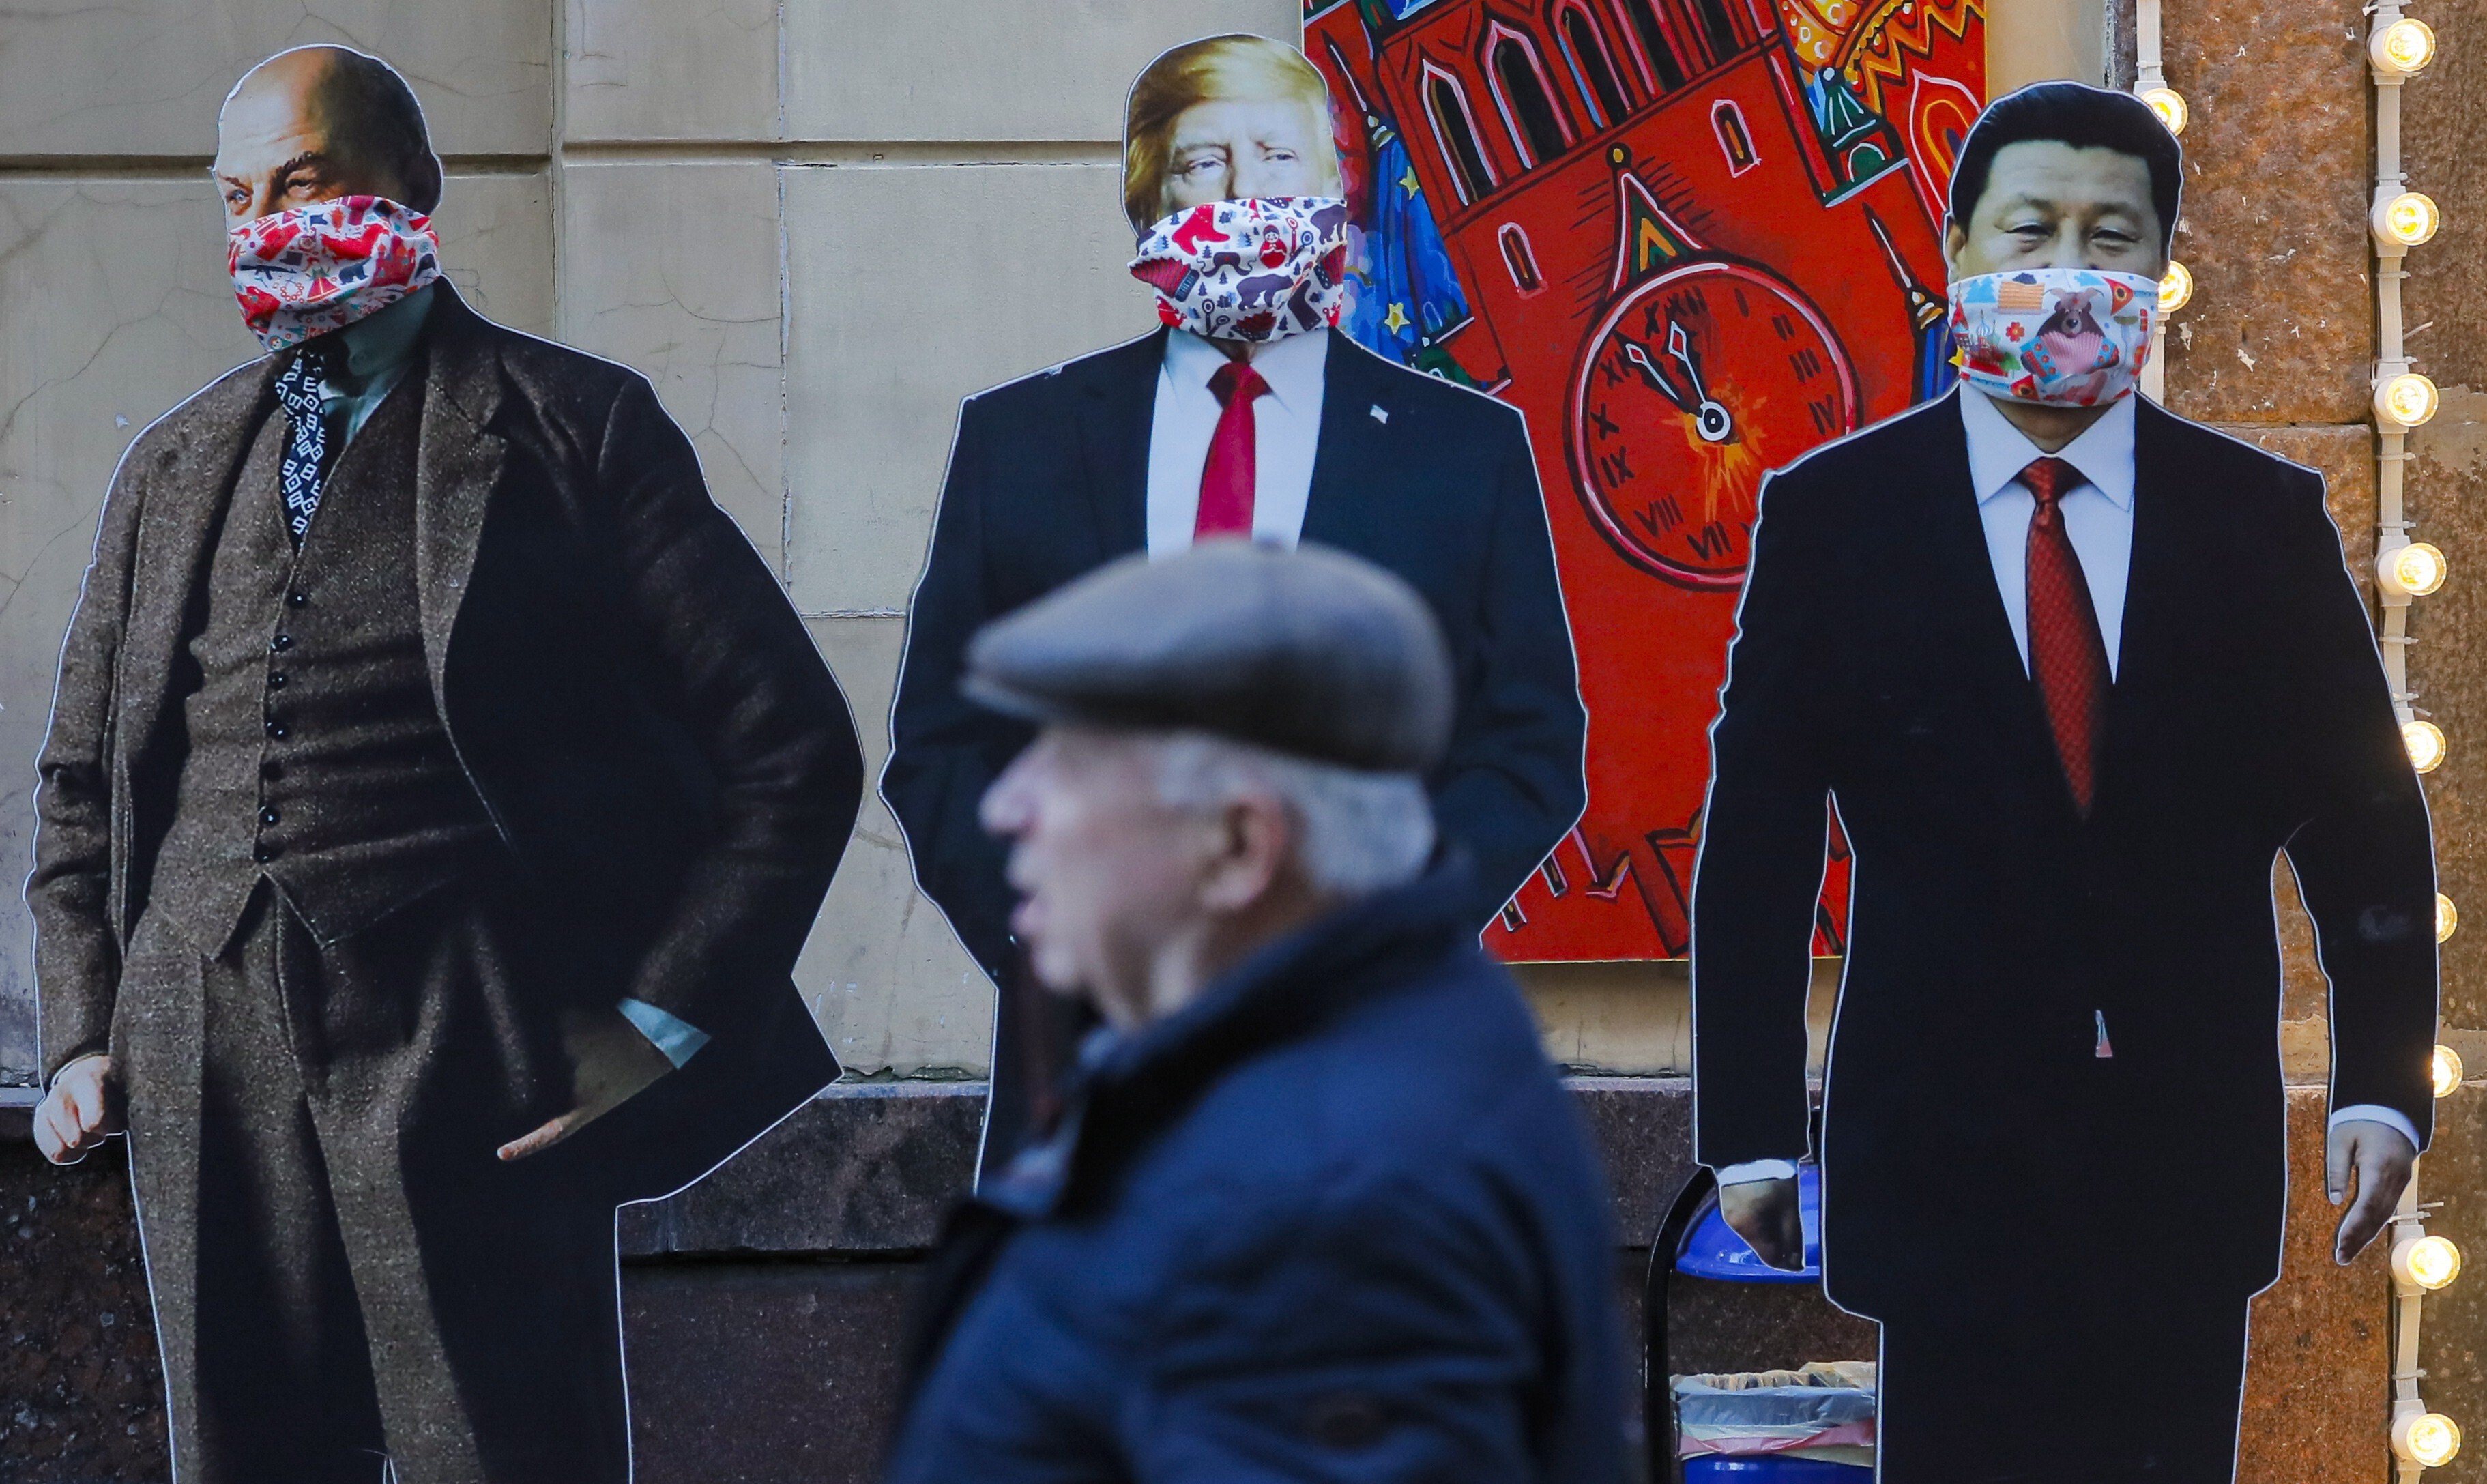 A man passes cardboard figures of Soviet Union founder Vladimir Lenin, US President Donald Trump and Chinese President Xi Jinping wearing face masks near a souvenir shop in Moscow. The three countries will be instrumental in shaping the post-coronavirus world. Photo: EPA-EFE